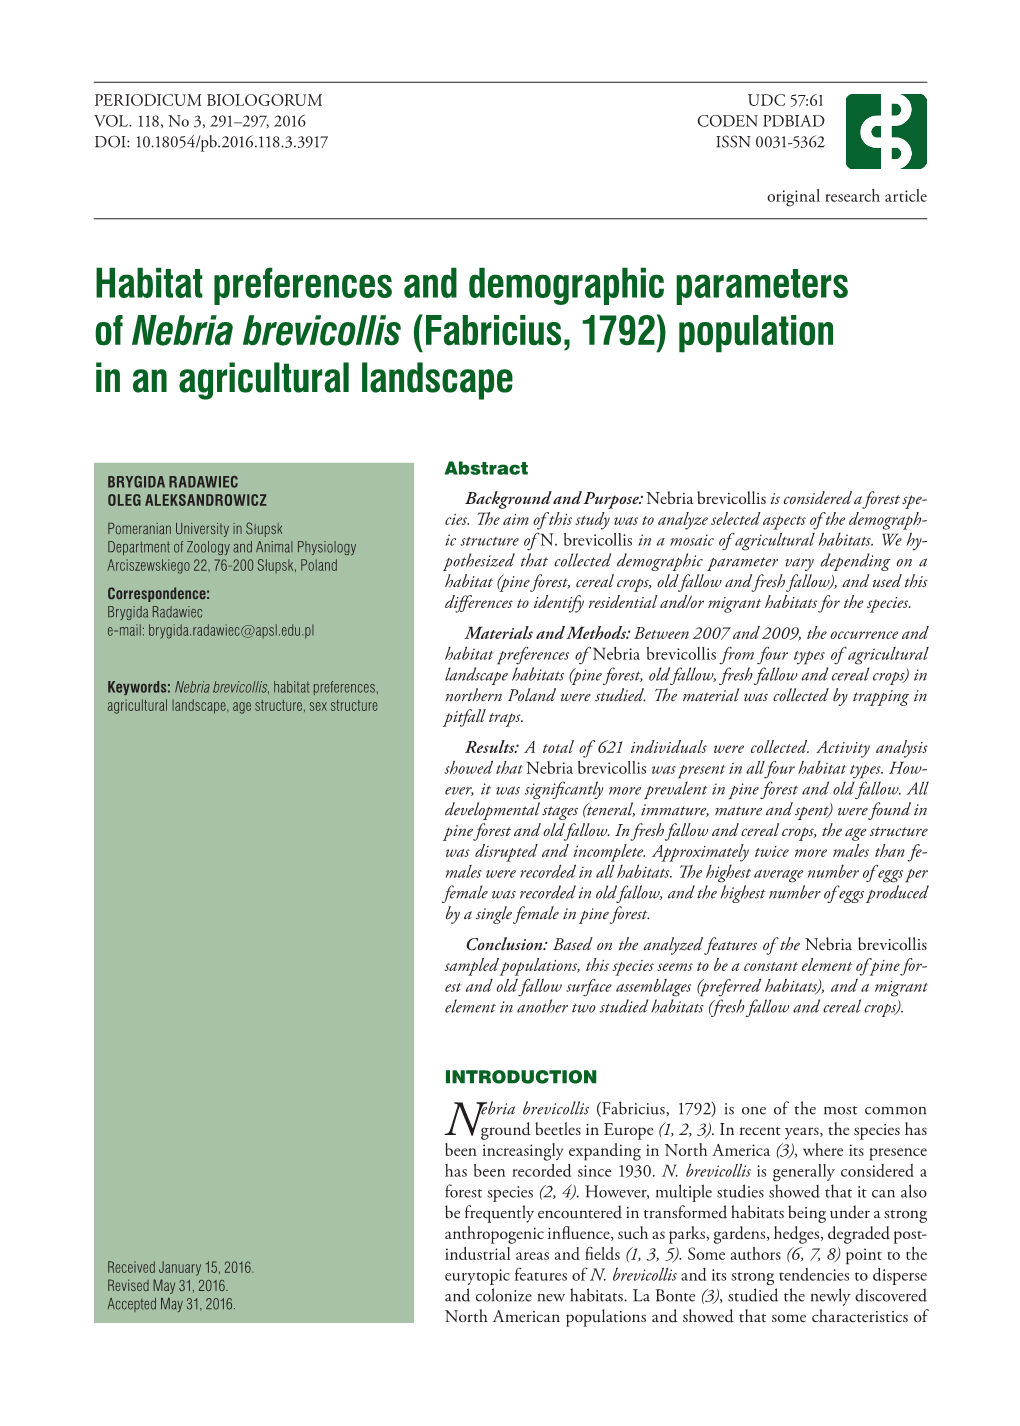 Habitat Preferences and Demographic Parameters of Nebria Brevicollis (Fabricius, 1792) Population in an Agricultural Landscape